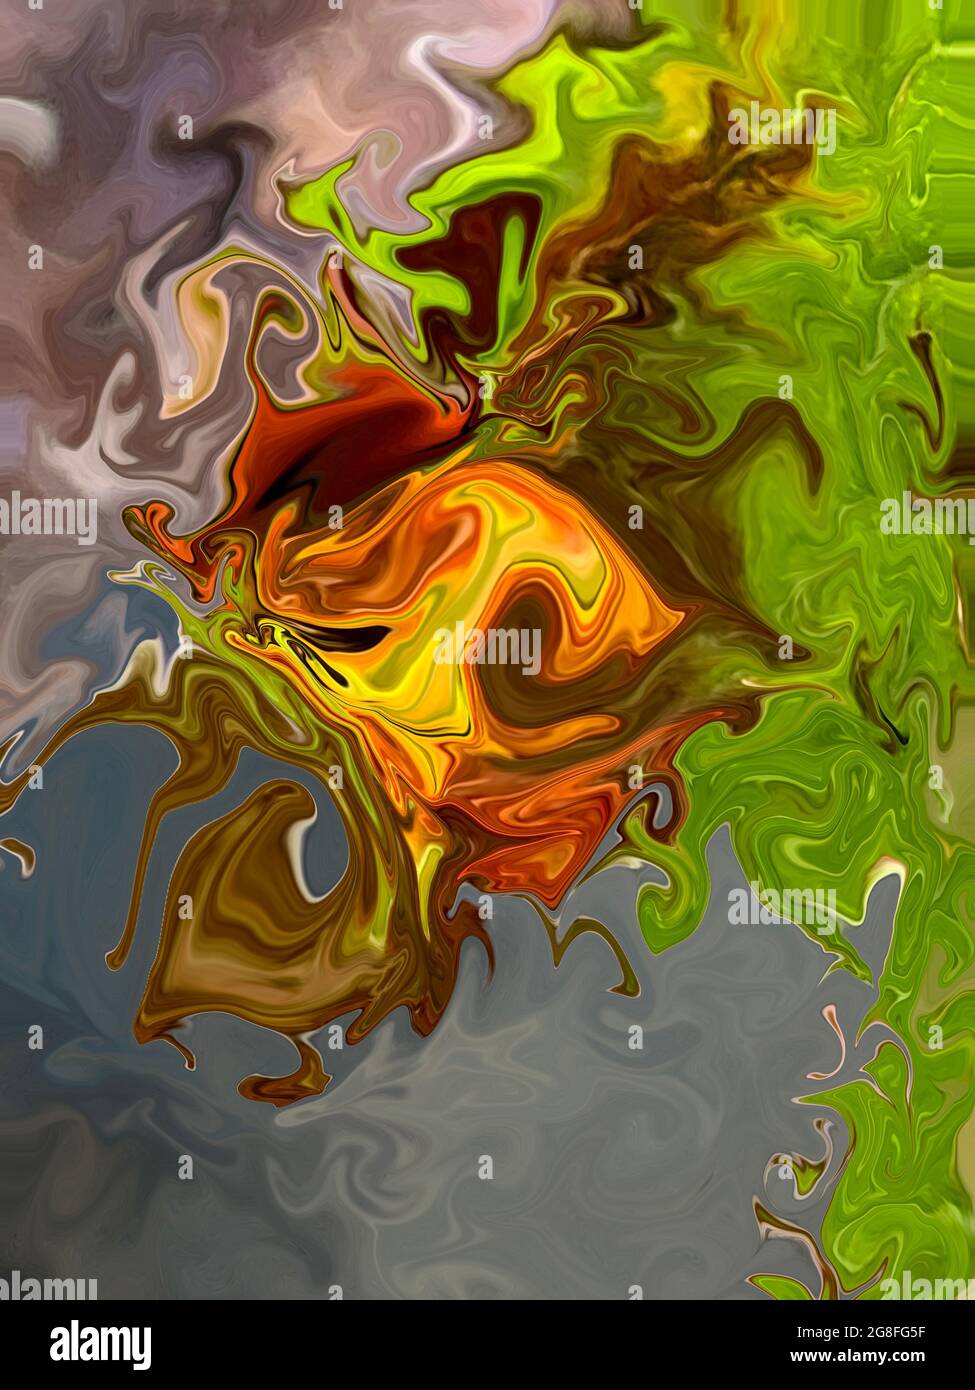 Abstract Digital Marbling Art Background Stock Photo